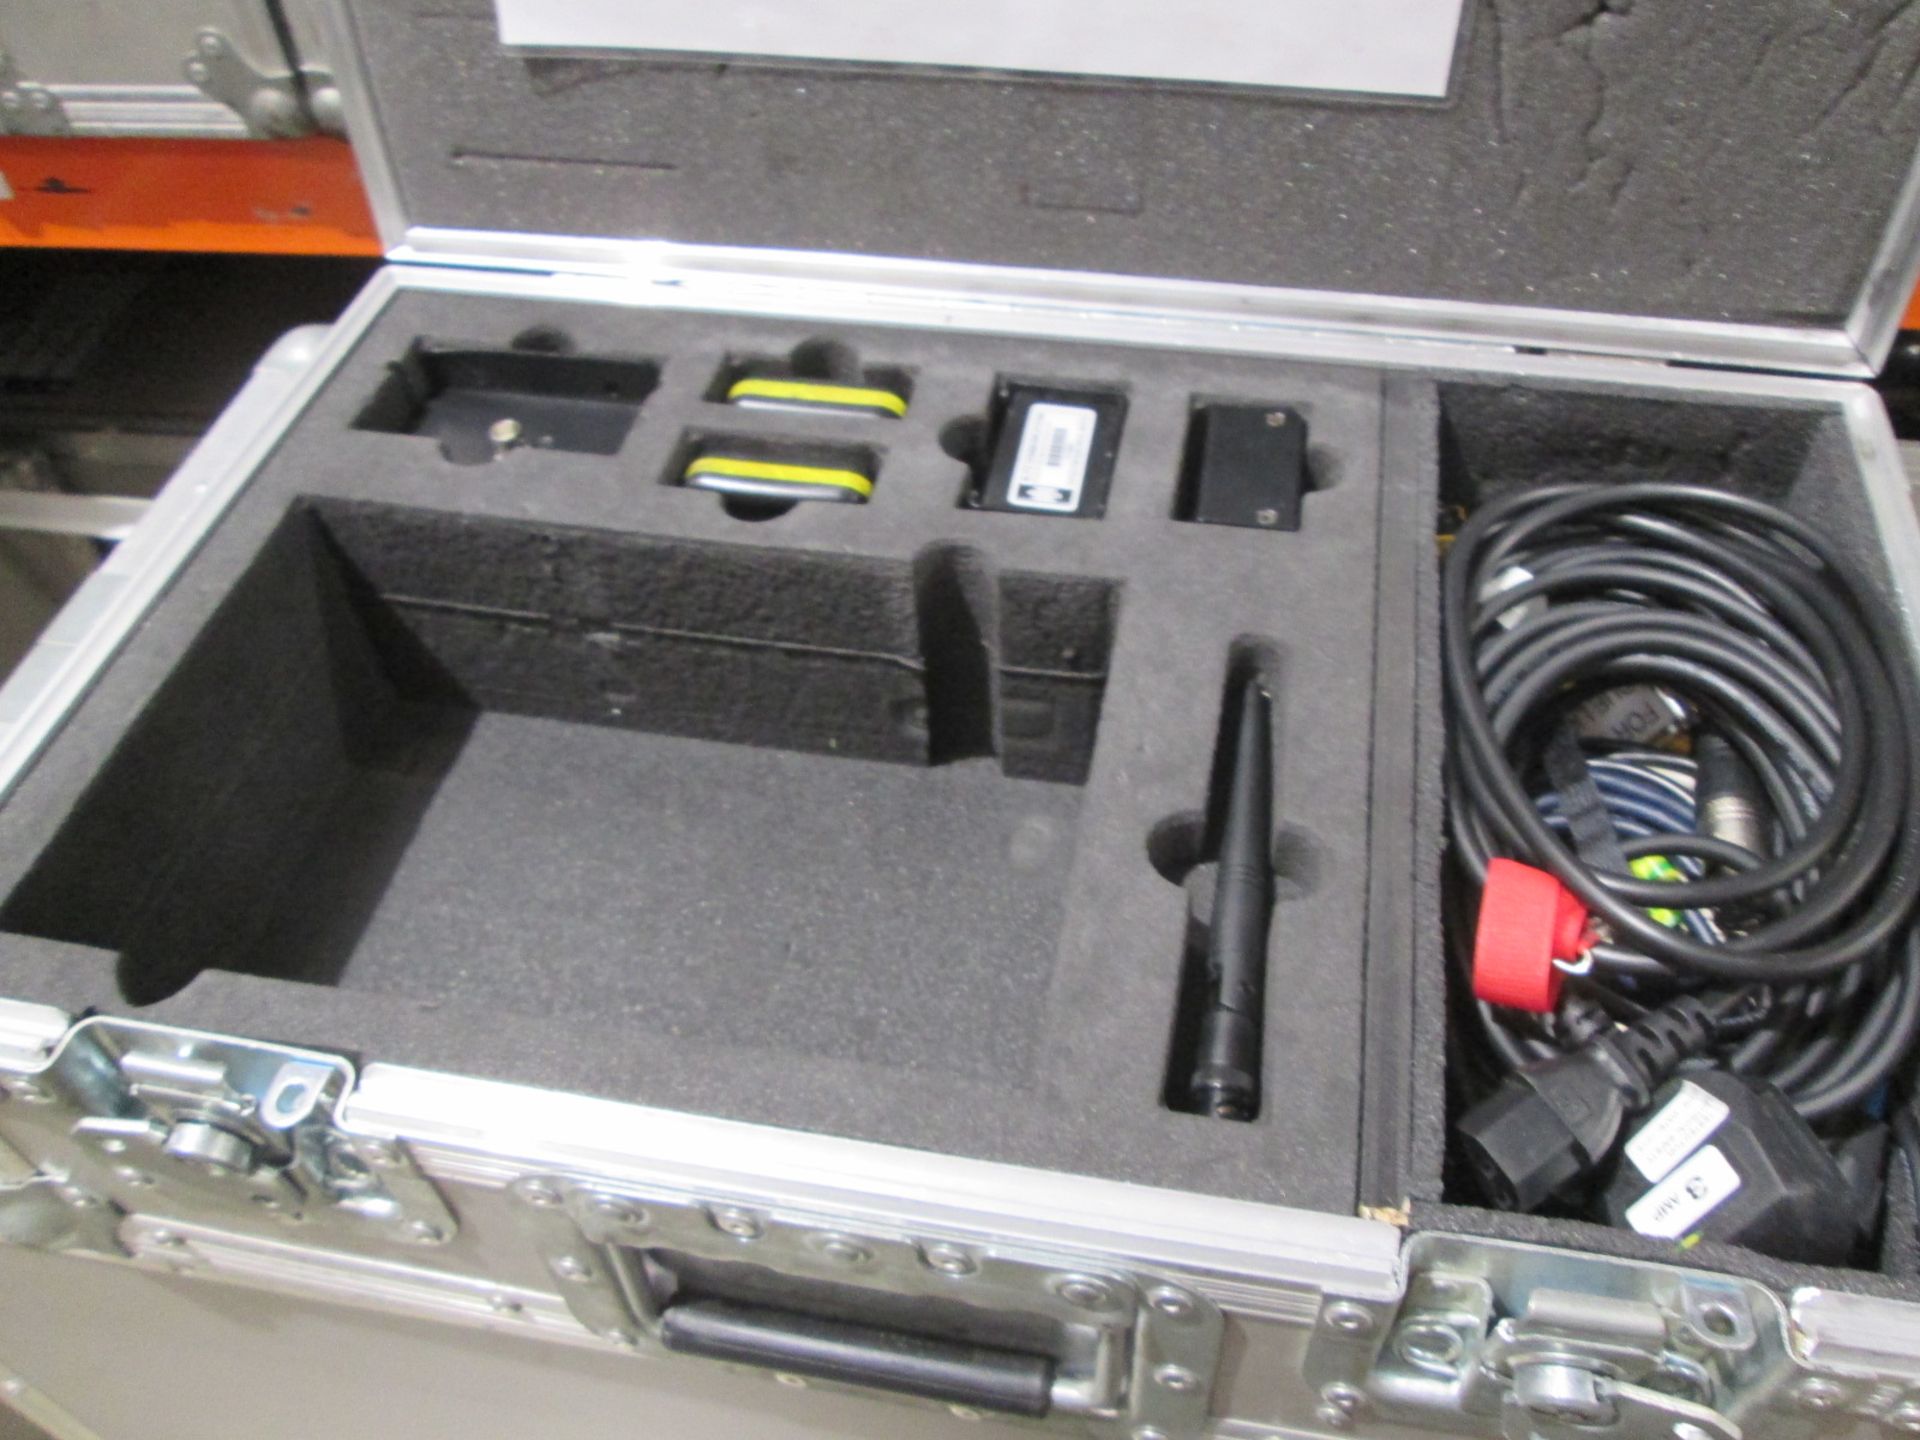 Interspace Industries Mastercue V6 Cue Light Kit (Qty 2) In flight case - Image 3 of 3